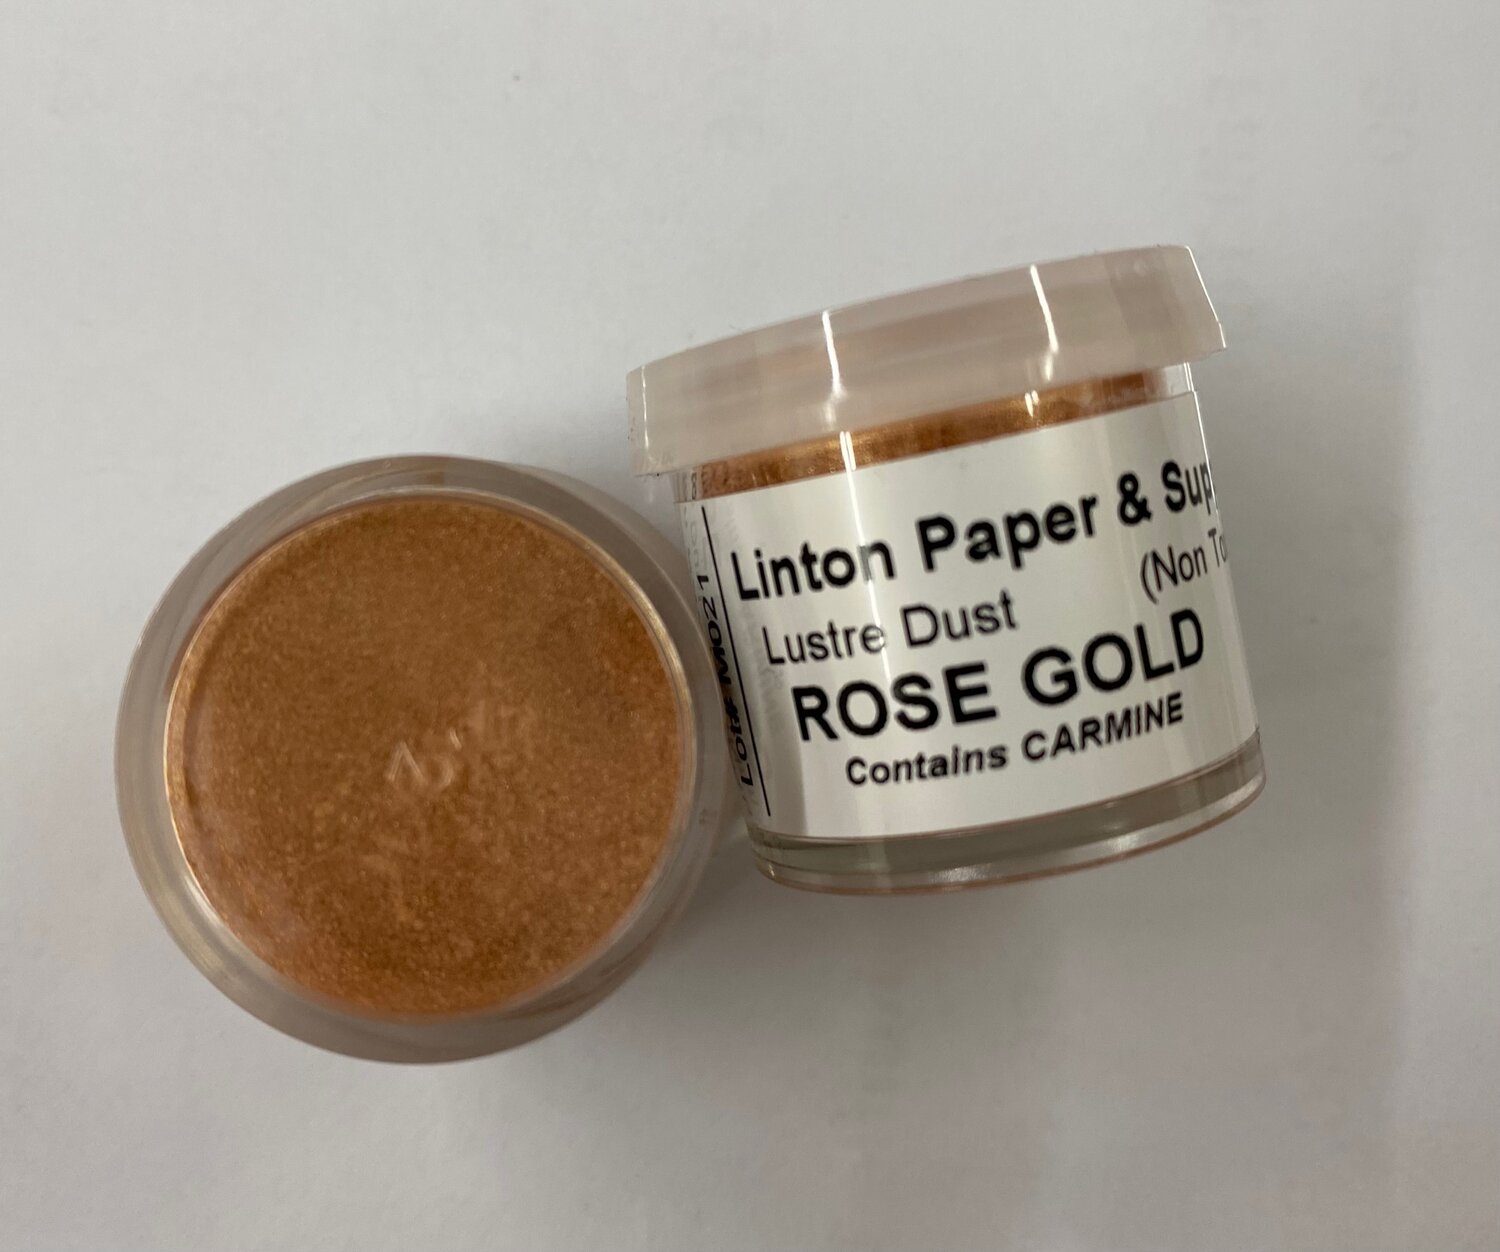 Luster Dust — Every Baking Moment